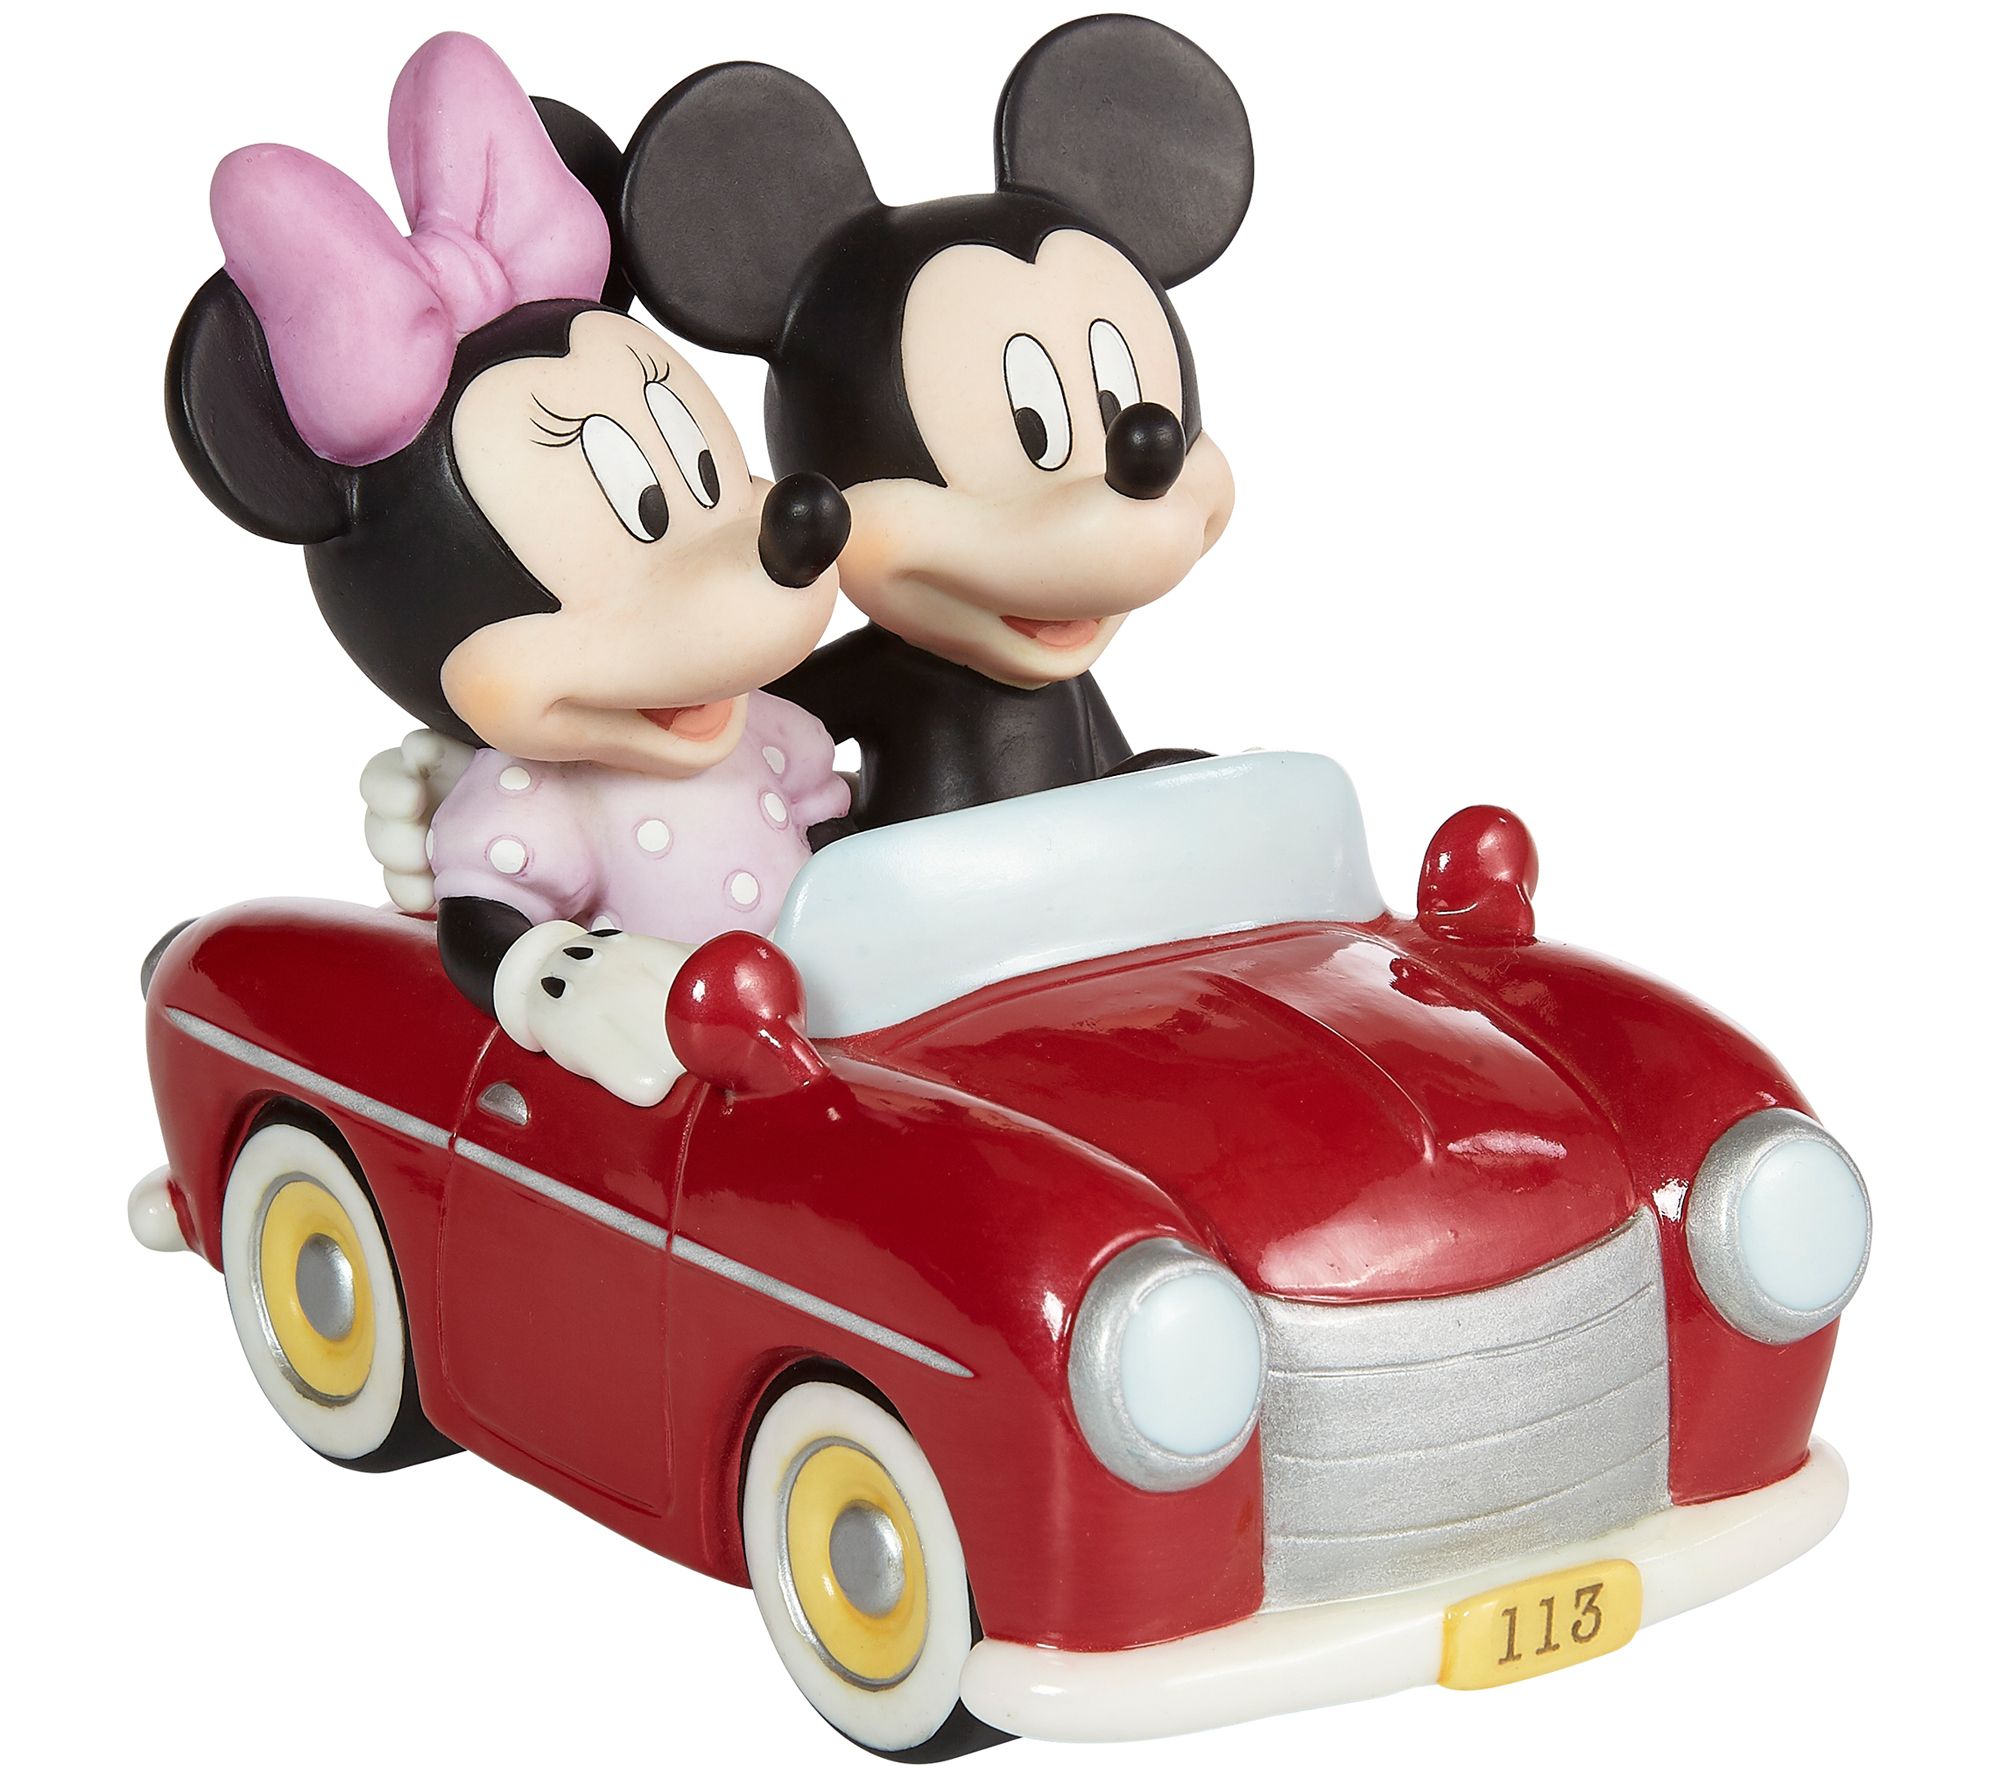 Enesco Disney Traditions Red Truck With Mickey And Frie Figurine 